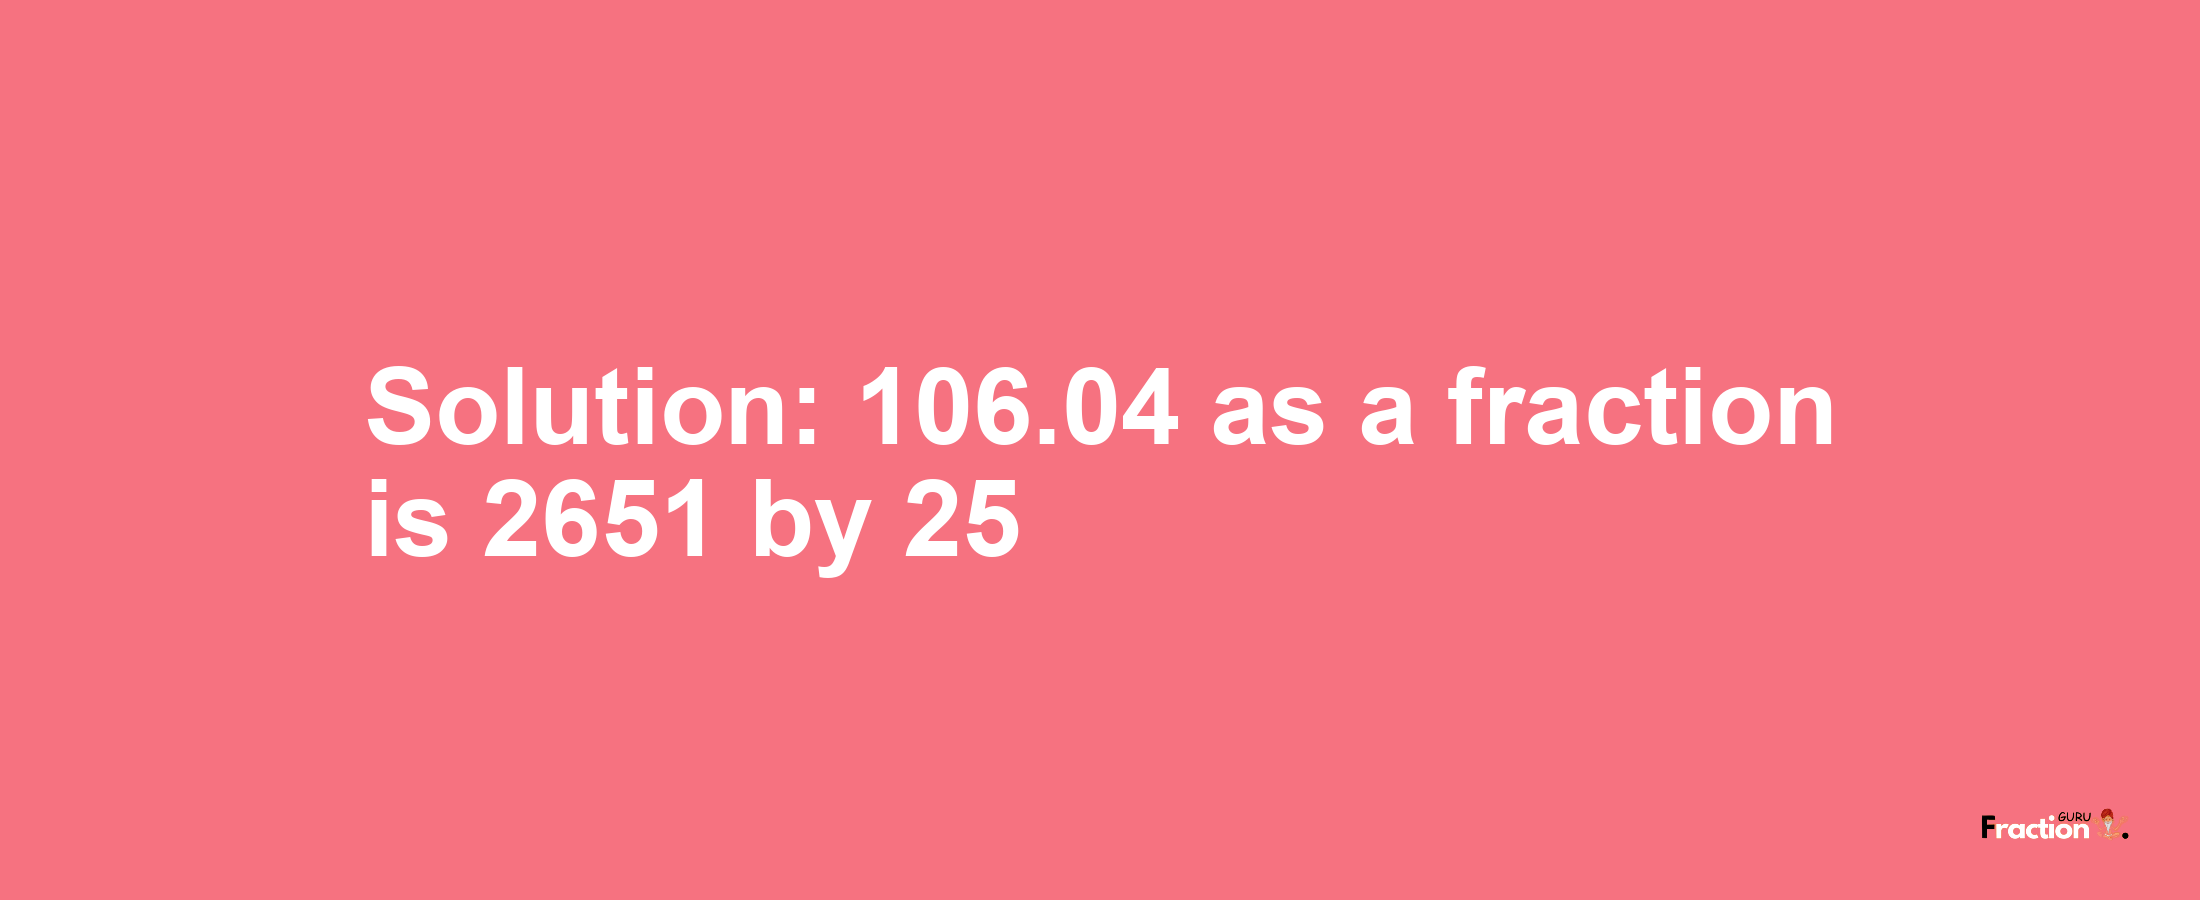 Solution:106.04 as a fraction is 2651/25